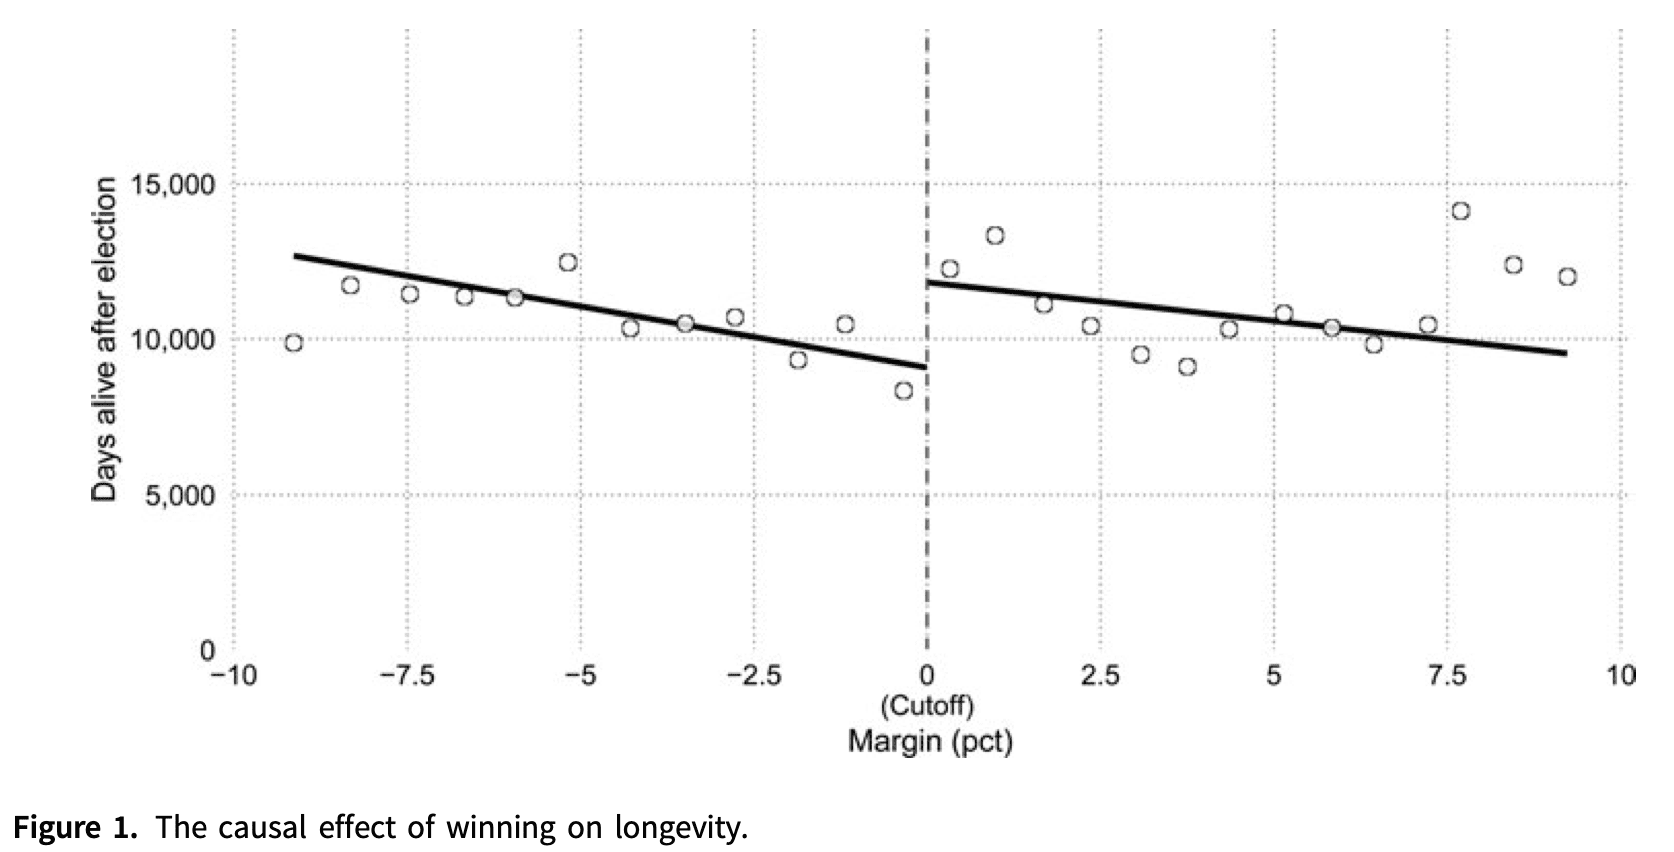 A figure from the Barfort, Klemmensen, and Larsen paper on gubernatorial elections and lifespan, showing their regression discontinuity analysis.  It shows lifespan decreasing with increased voteshare, except with a large upwards discontinuity at the crossover from losing to winning.